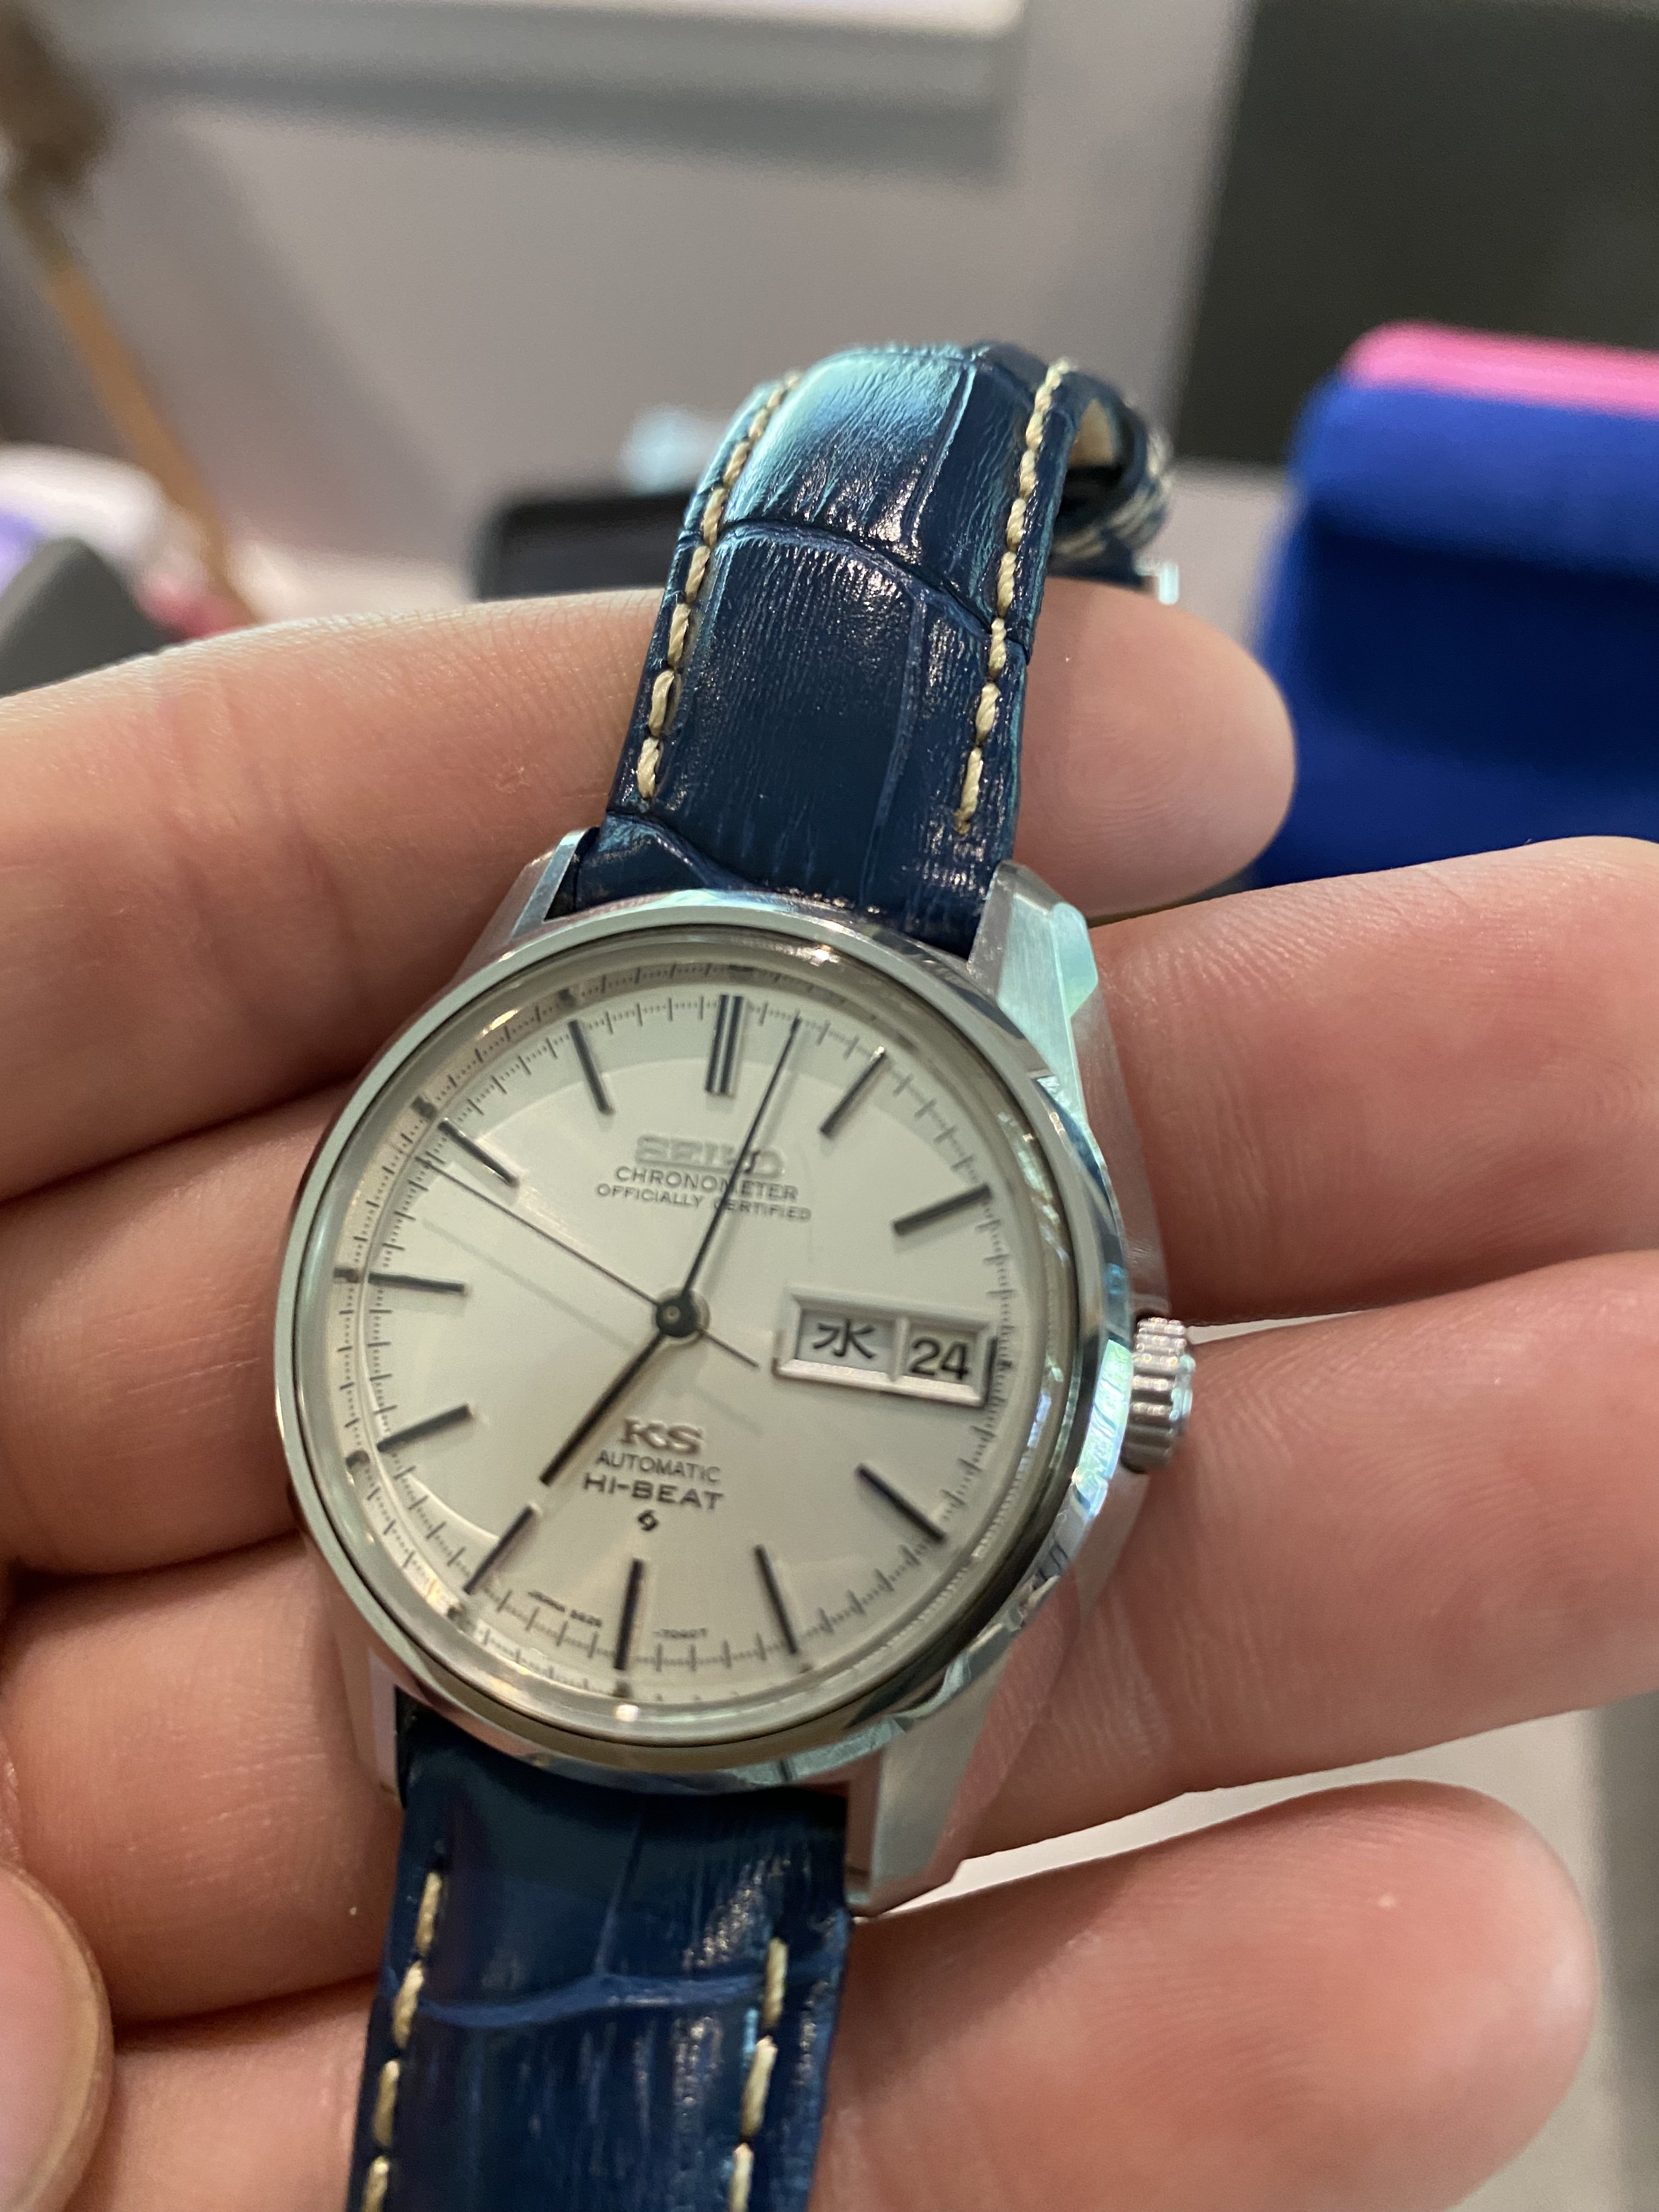 A little help with a King Seiko | Omega Forums